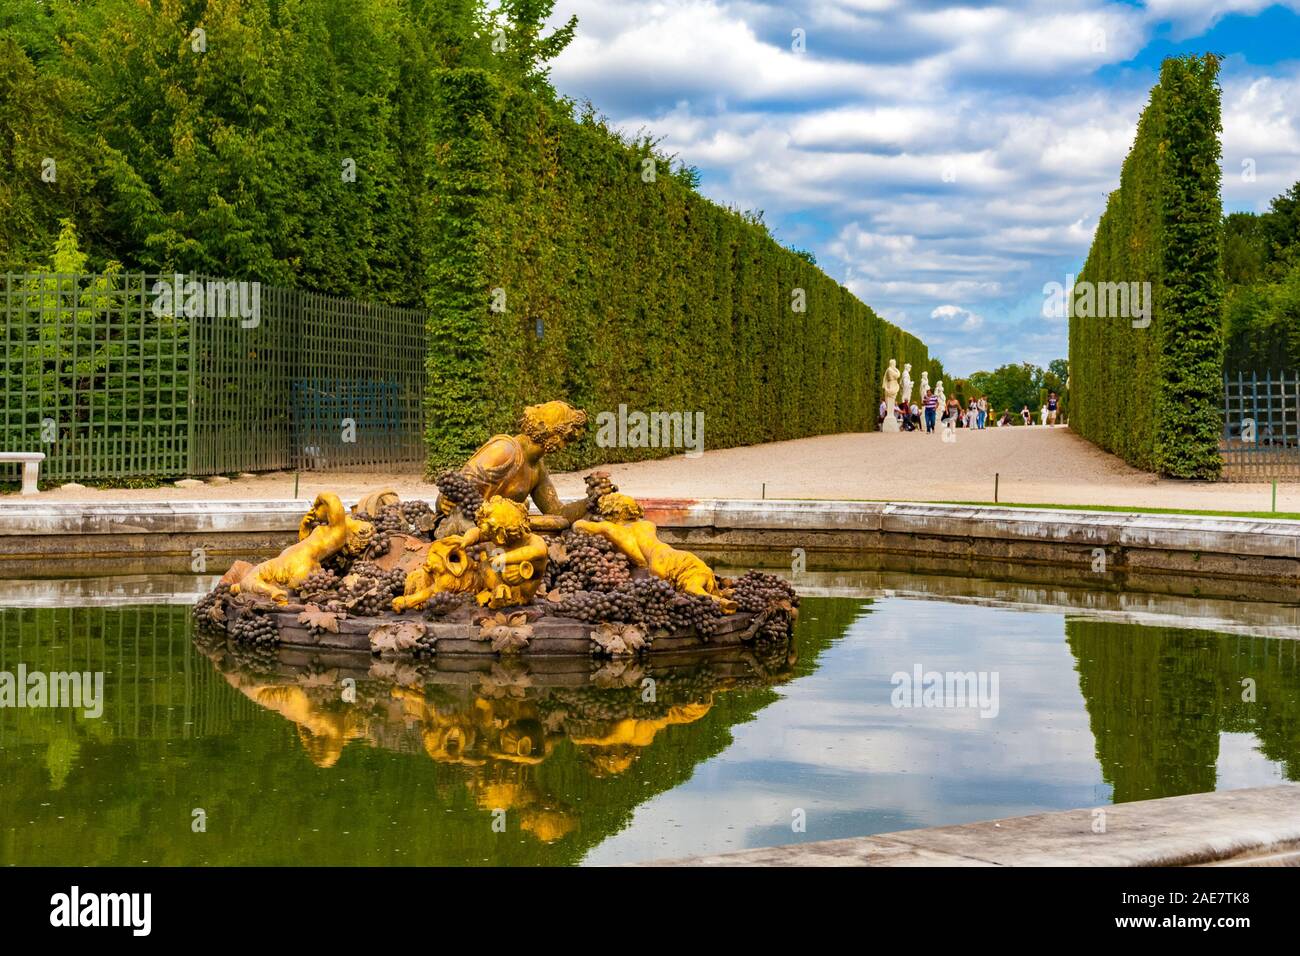 https://c8.alamy.com/comp/2AE7TK8/close-view-of-the-bacchus-fountain-or-autumn-fountain-in-the-versailles-garden-the-gilded-sculptures-represents-bacchus-god-of-wine-and-drunkenness-2AE7TK8.jpg